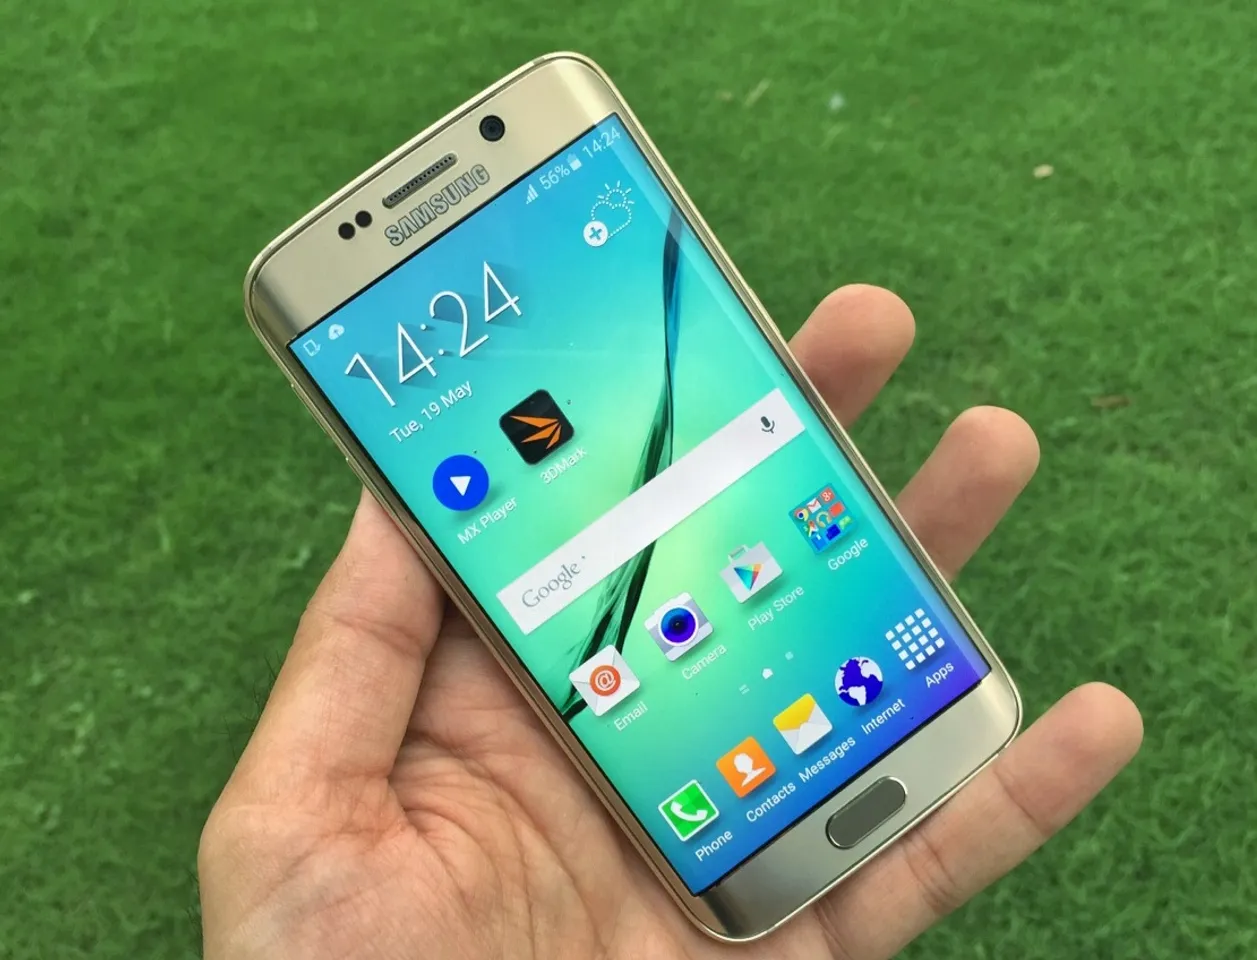 Samsung Galaxy S6 Edge: A treat for consumers and a big leap for Samsung